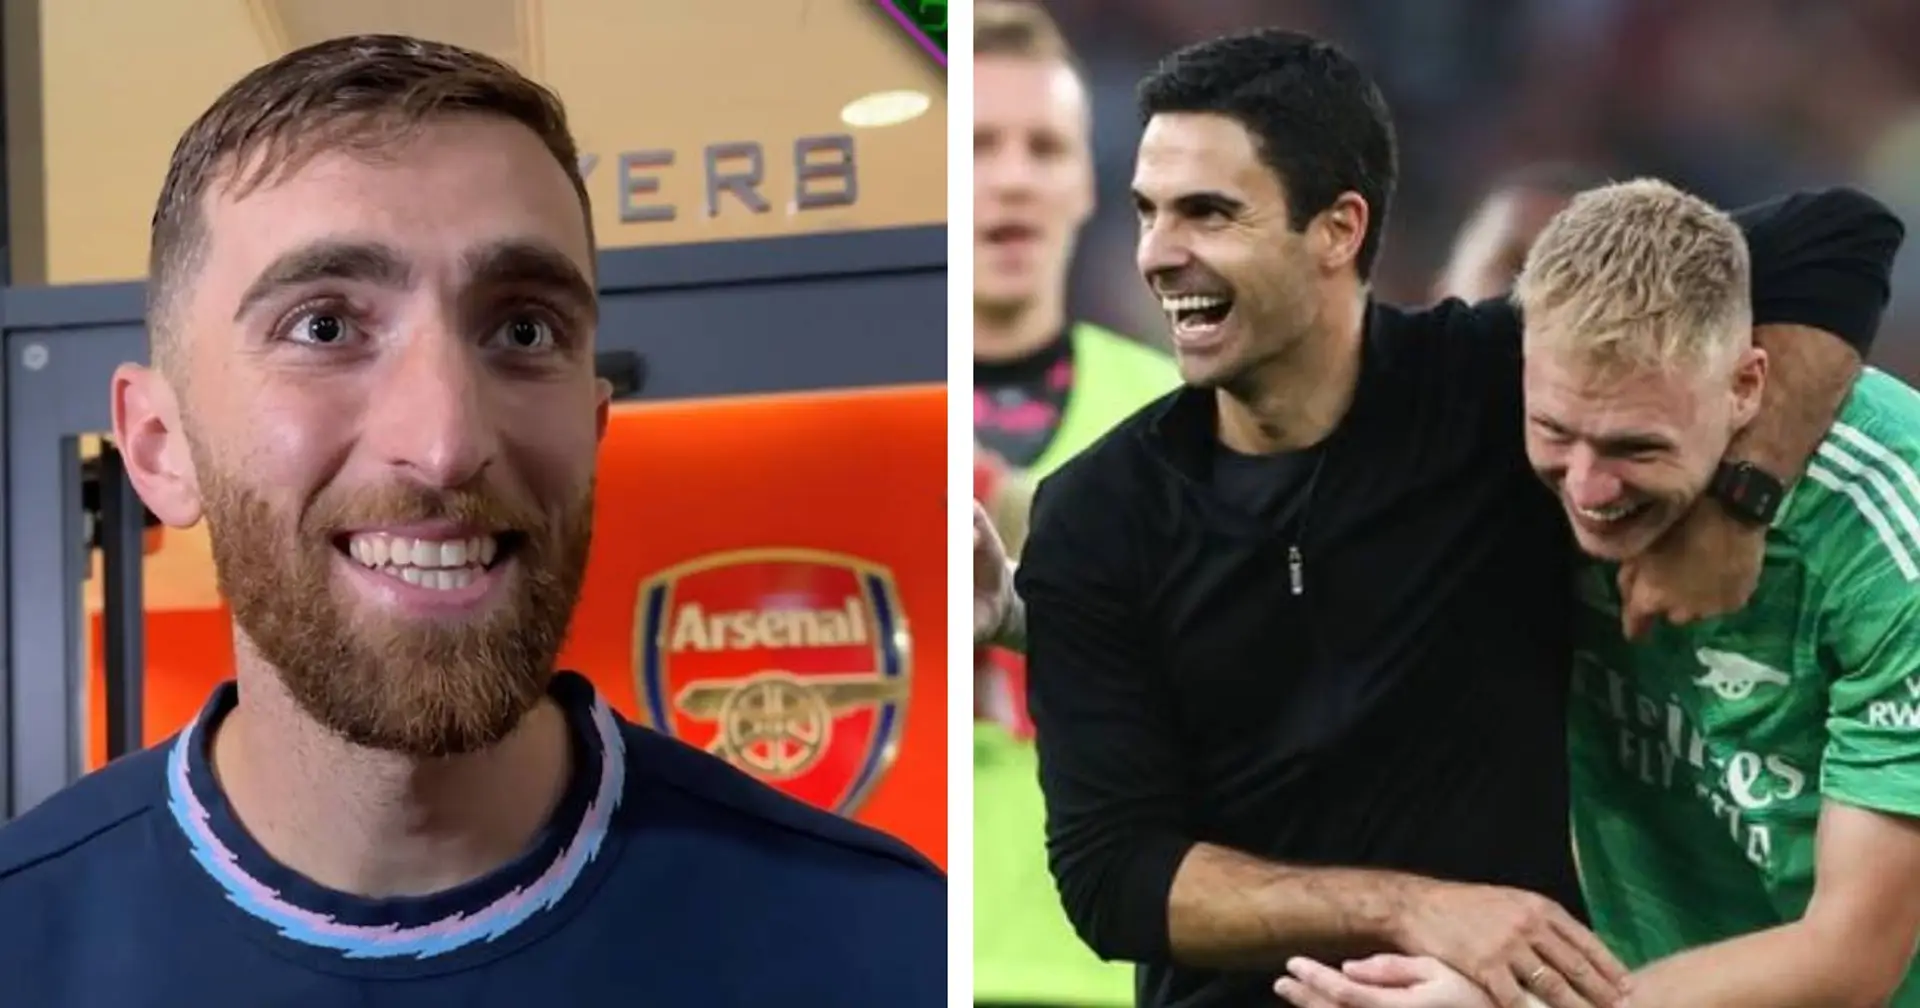 'I want to play every single chance I get': Matt Turner sends message to Arteta over game time